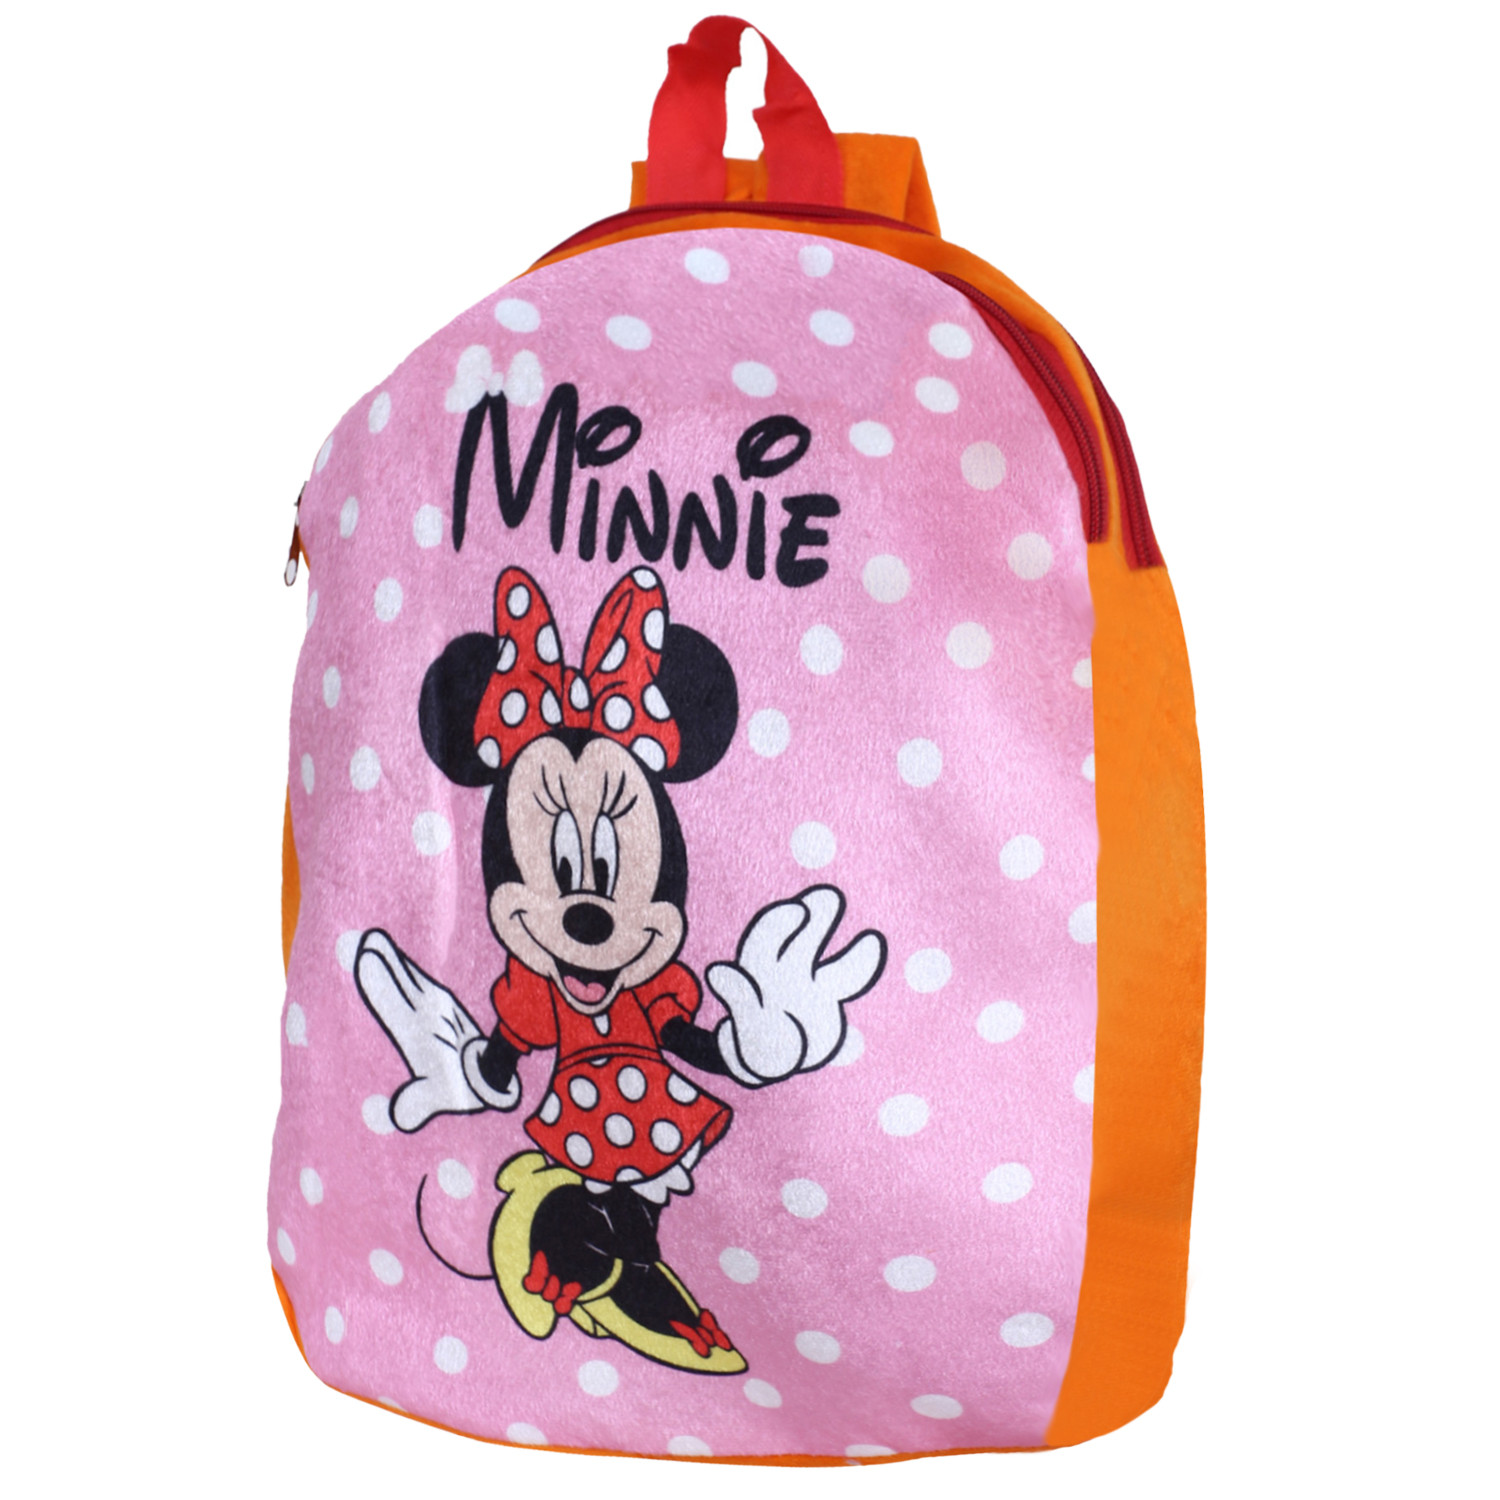 Kuber Industries Disney Minnie Plush Backpack|2 Compartment Stitched Velvet School Bag|Durable Toddler Haversack For Travel,School with Zipper Closure (Pink & Orange)